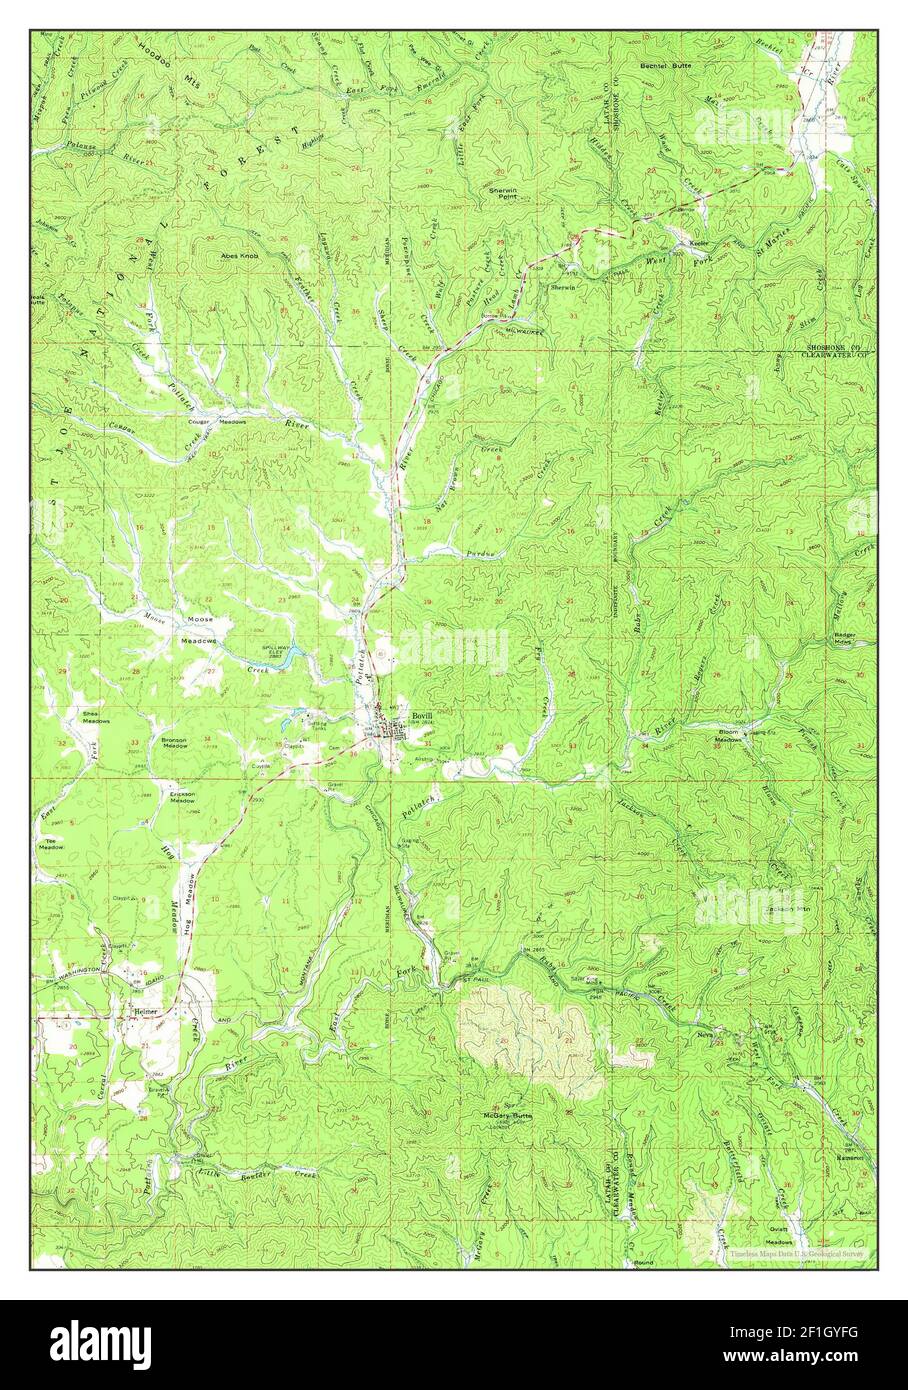 Bovill, Idaho, map 1961, 1:62500, United States of America by Timeless Maps, data U.S. Geological Survey Stock Photo